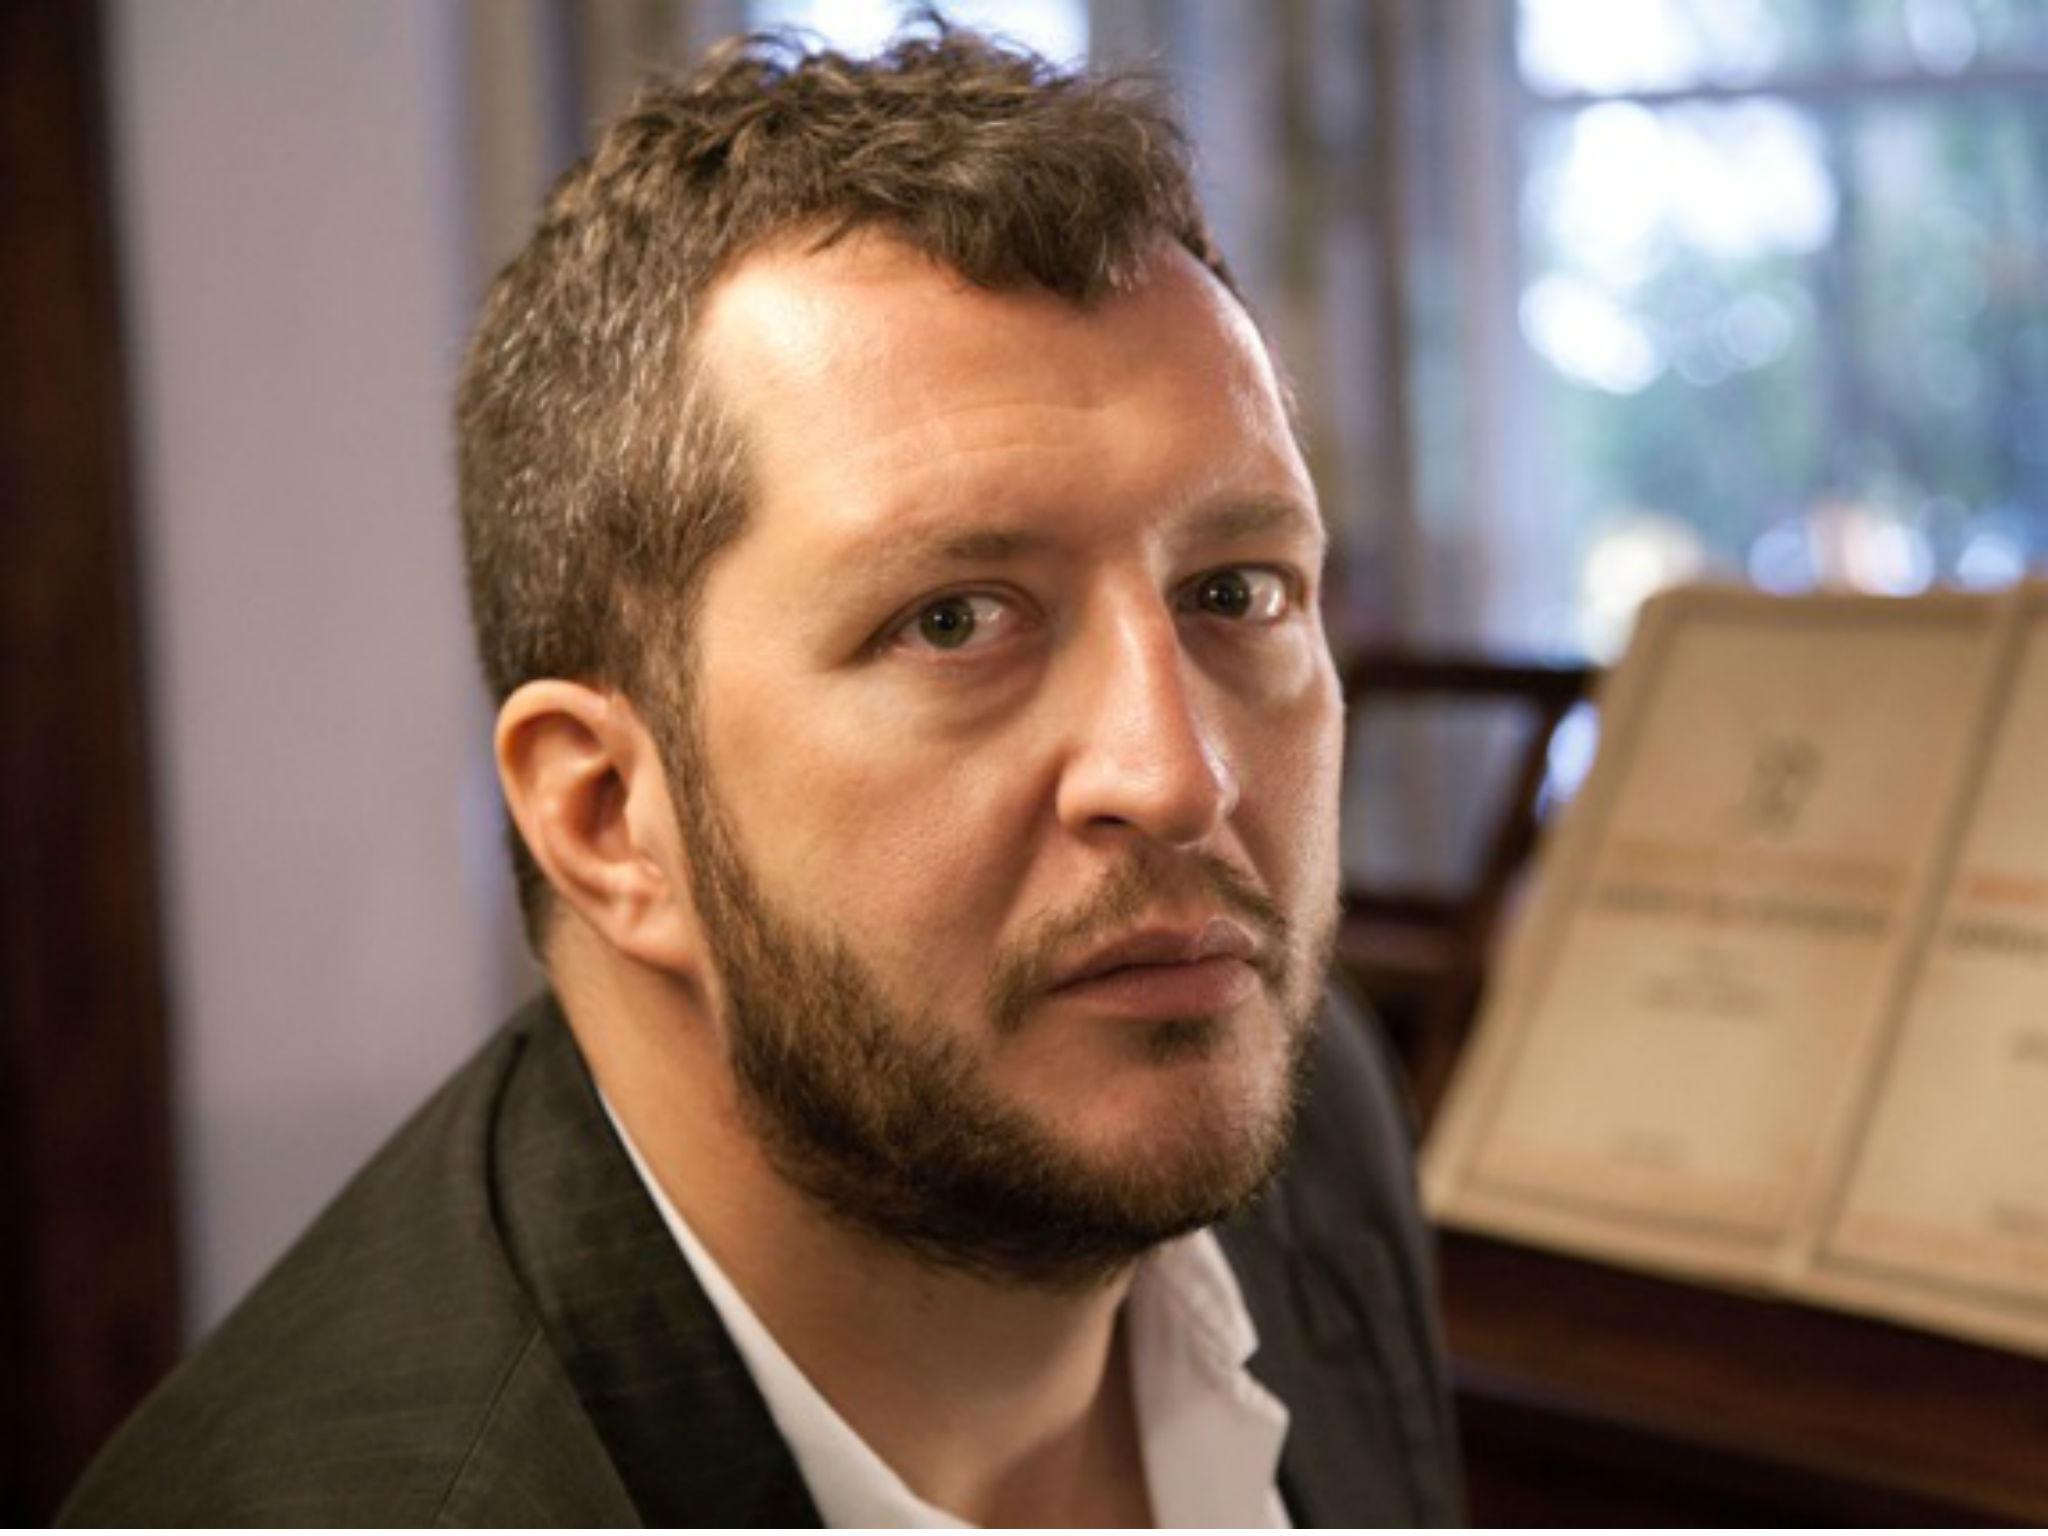 The composer Thomas Adès' played piano works by his teacher Kurtág, 'Officium breve' and Selections from 'Játékok'